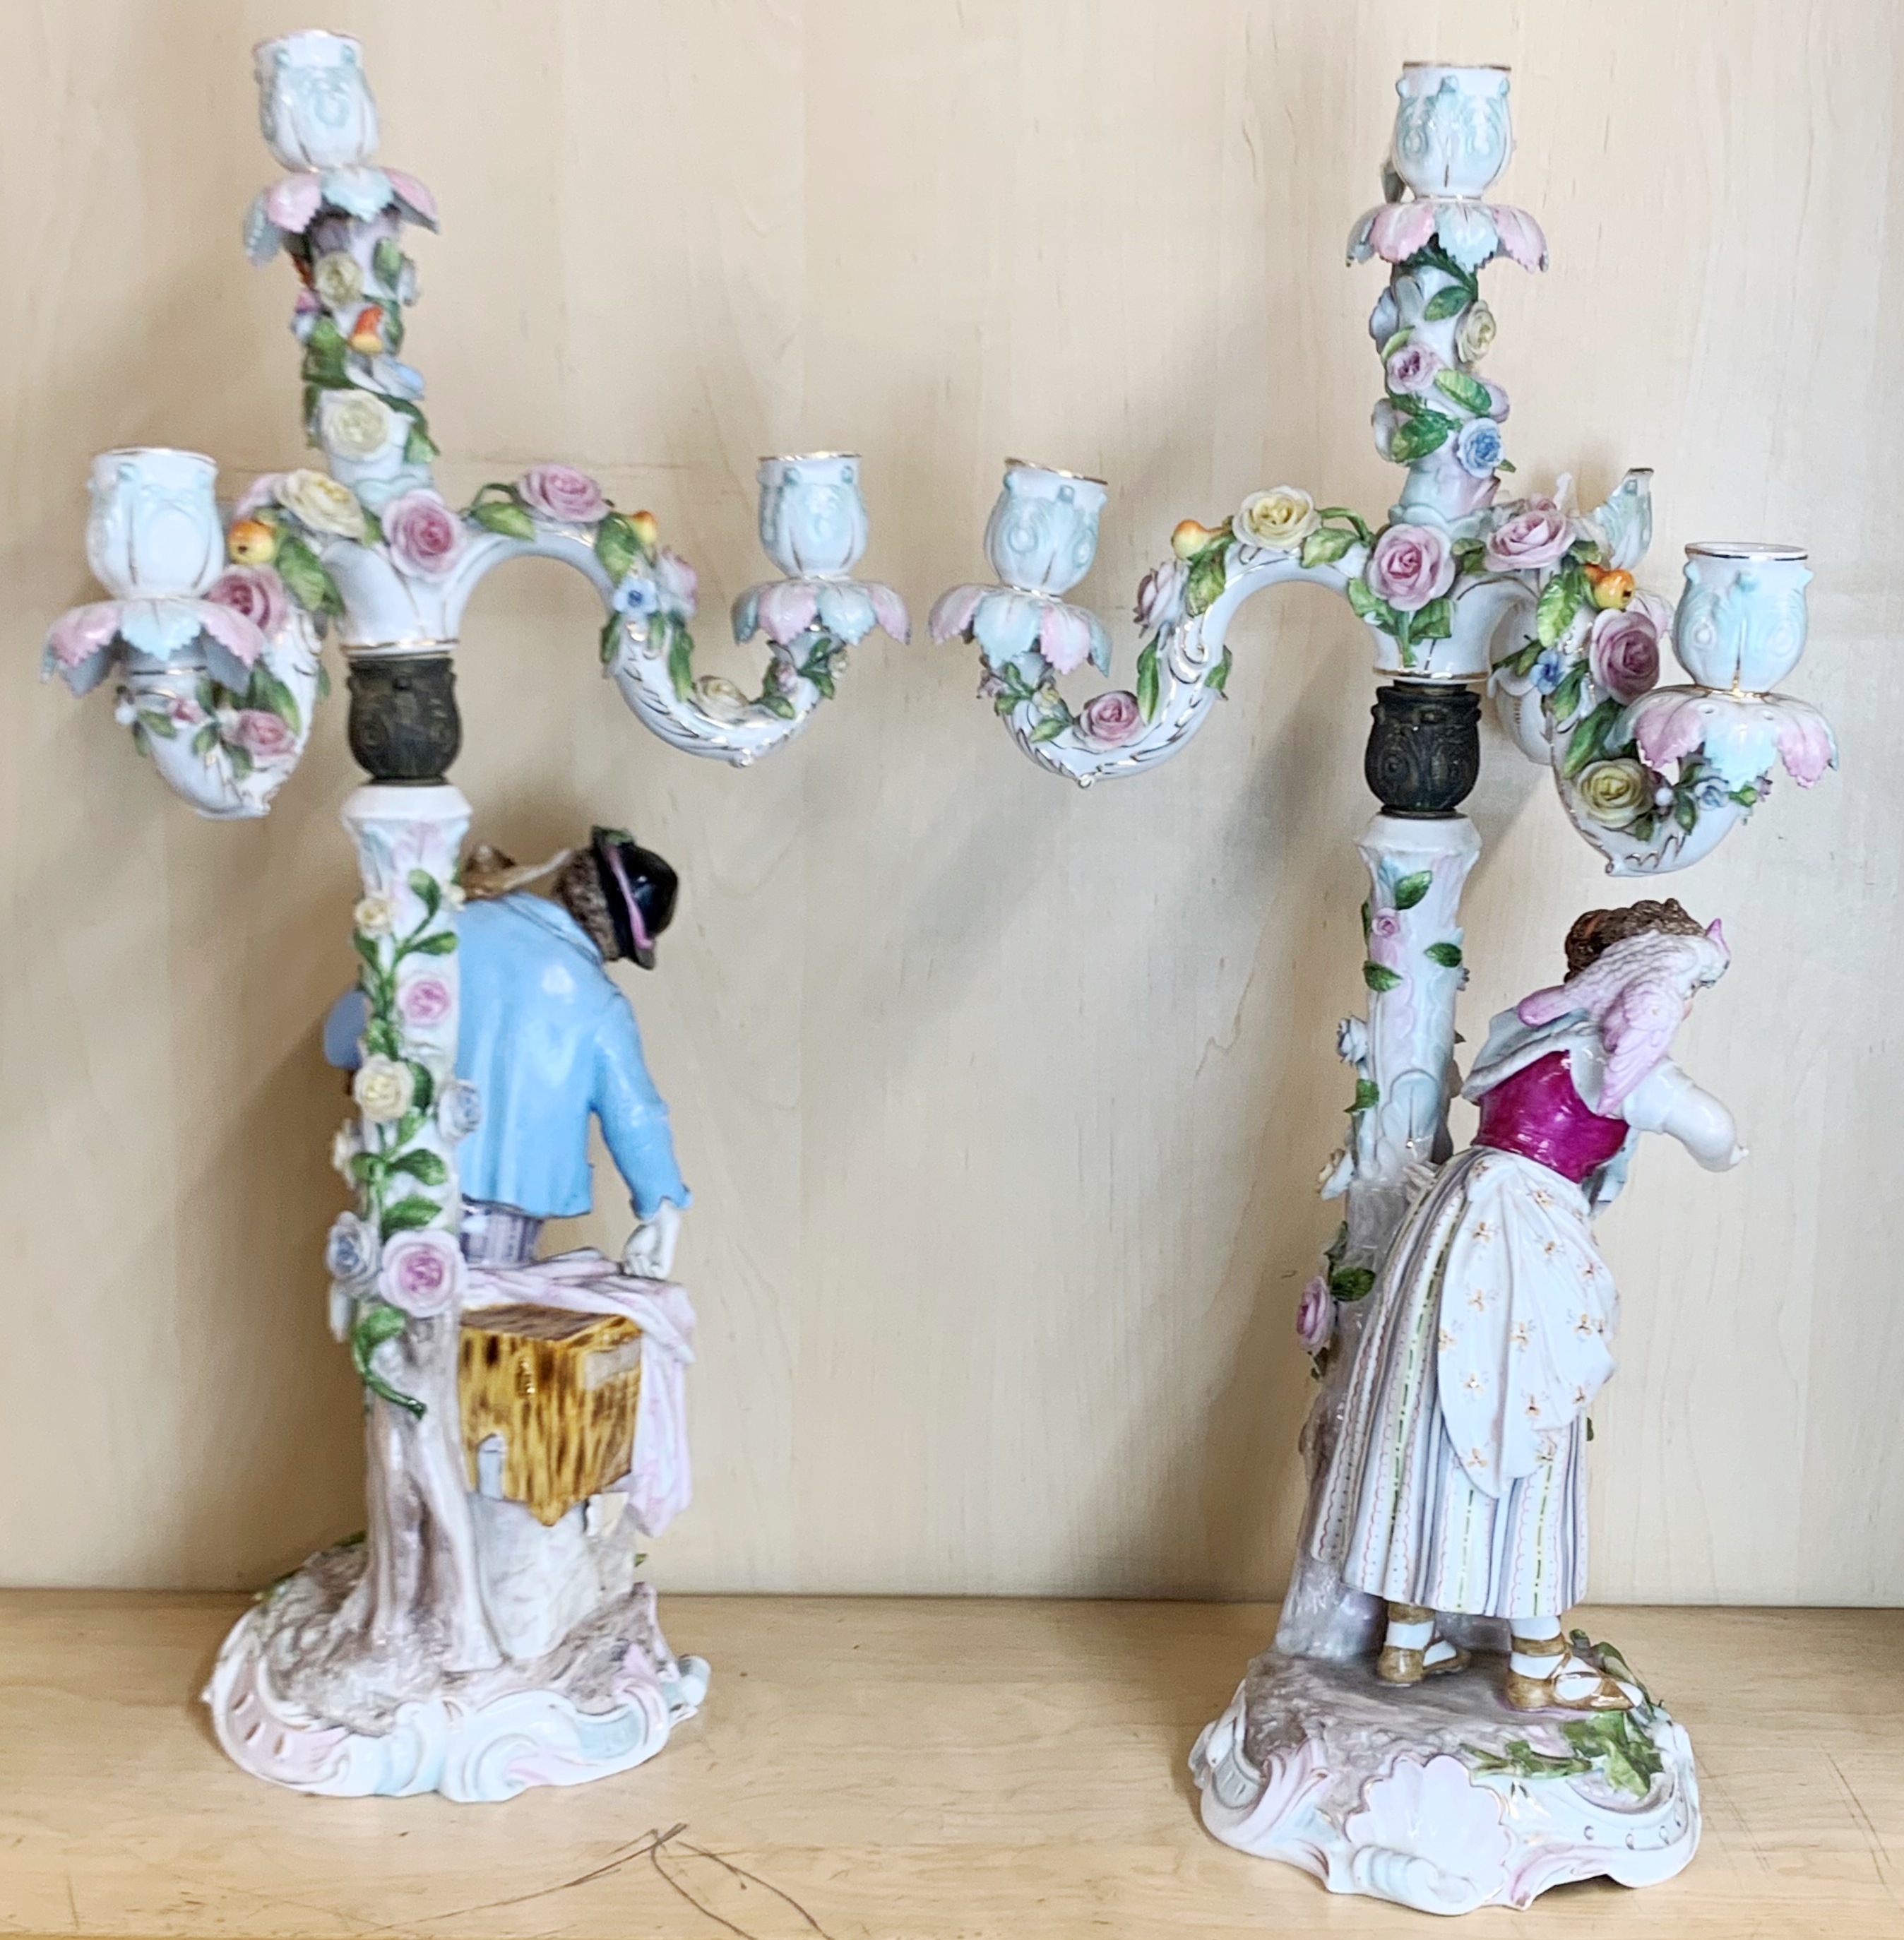 A pair of large 19th century hand-painted porcelain candelabras, H. 52cm. some damage, part of the - Image 5 of 5